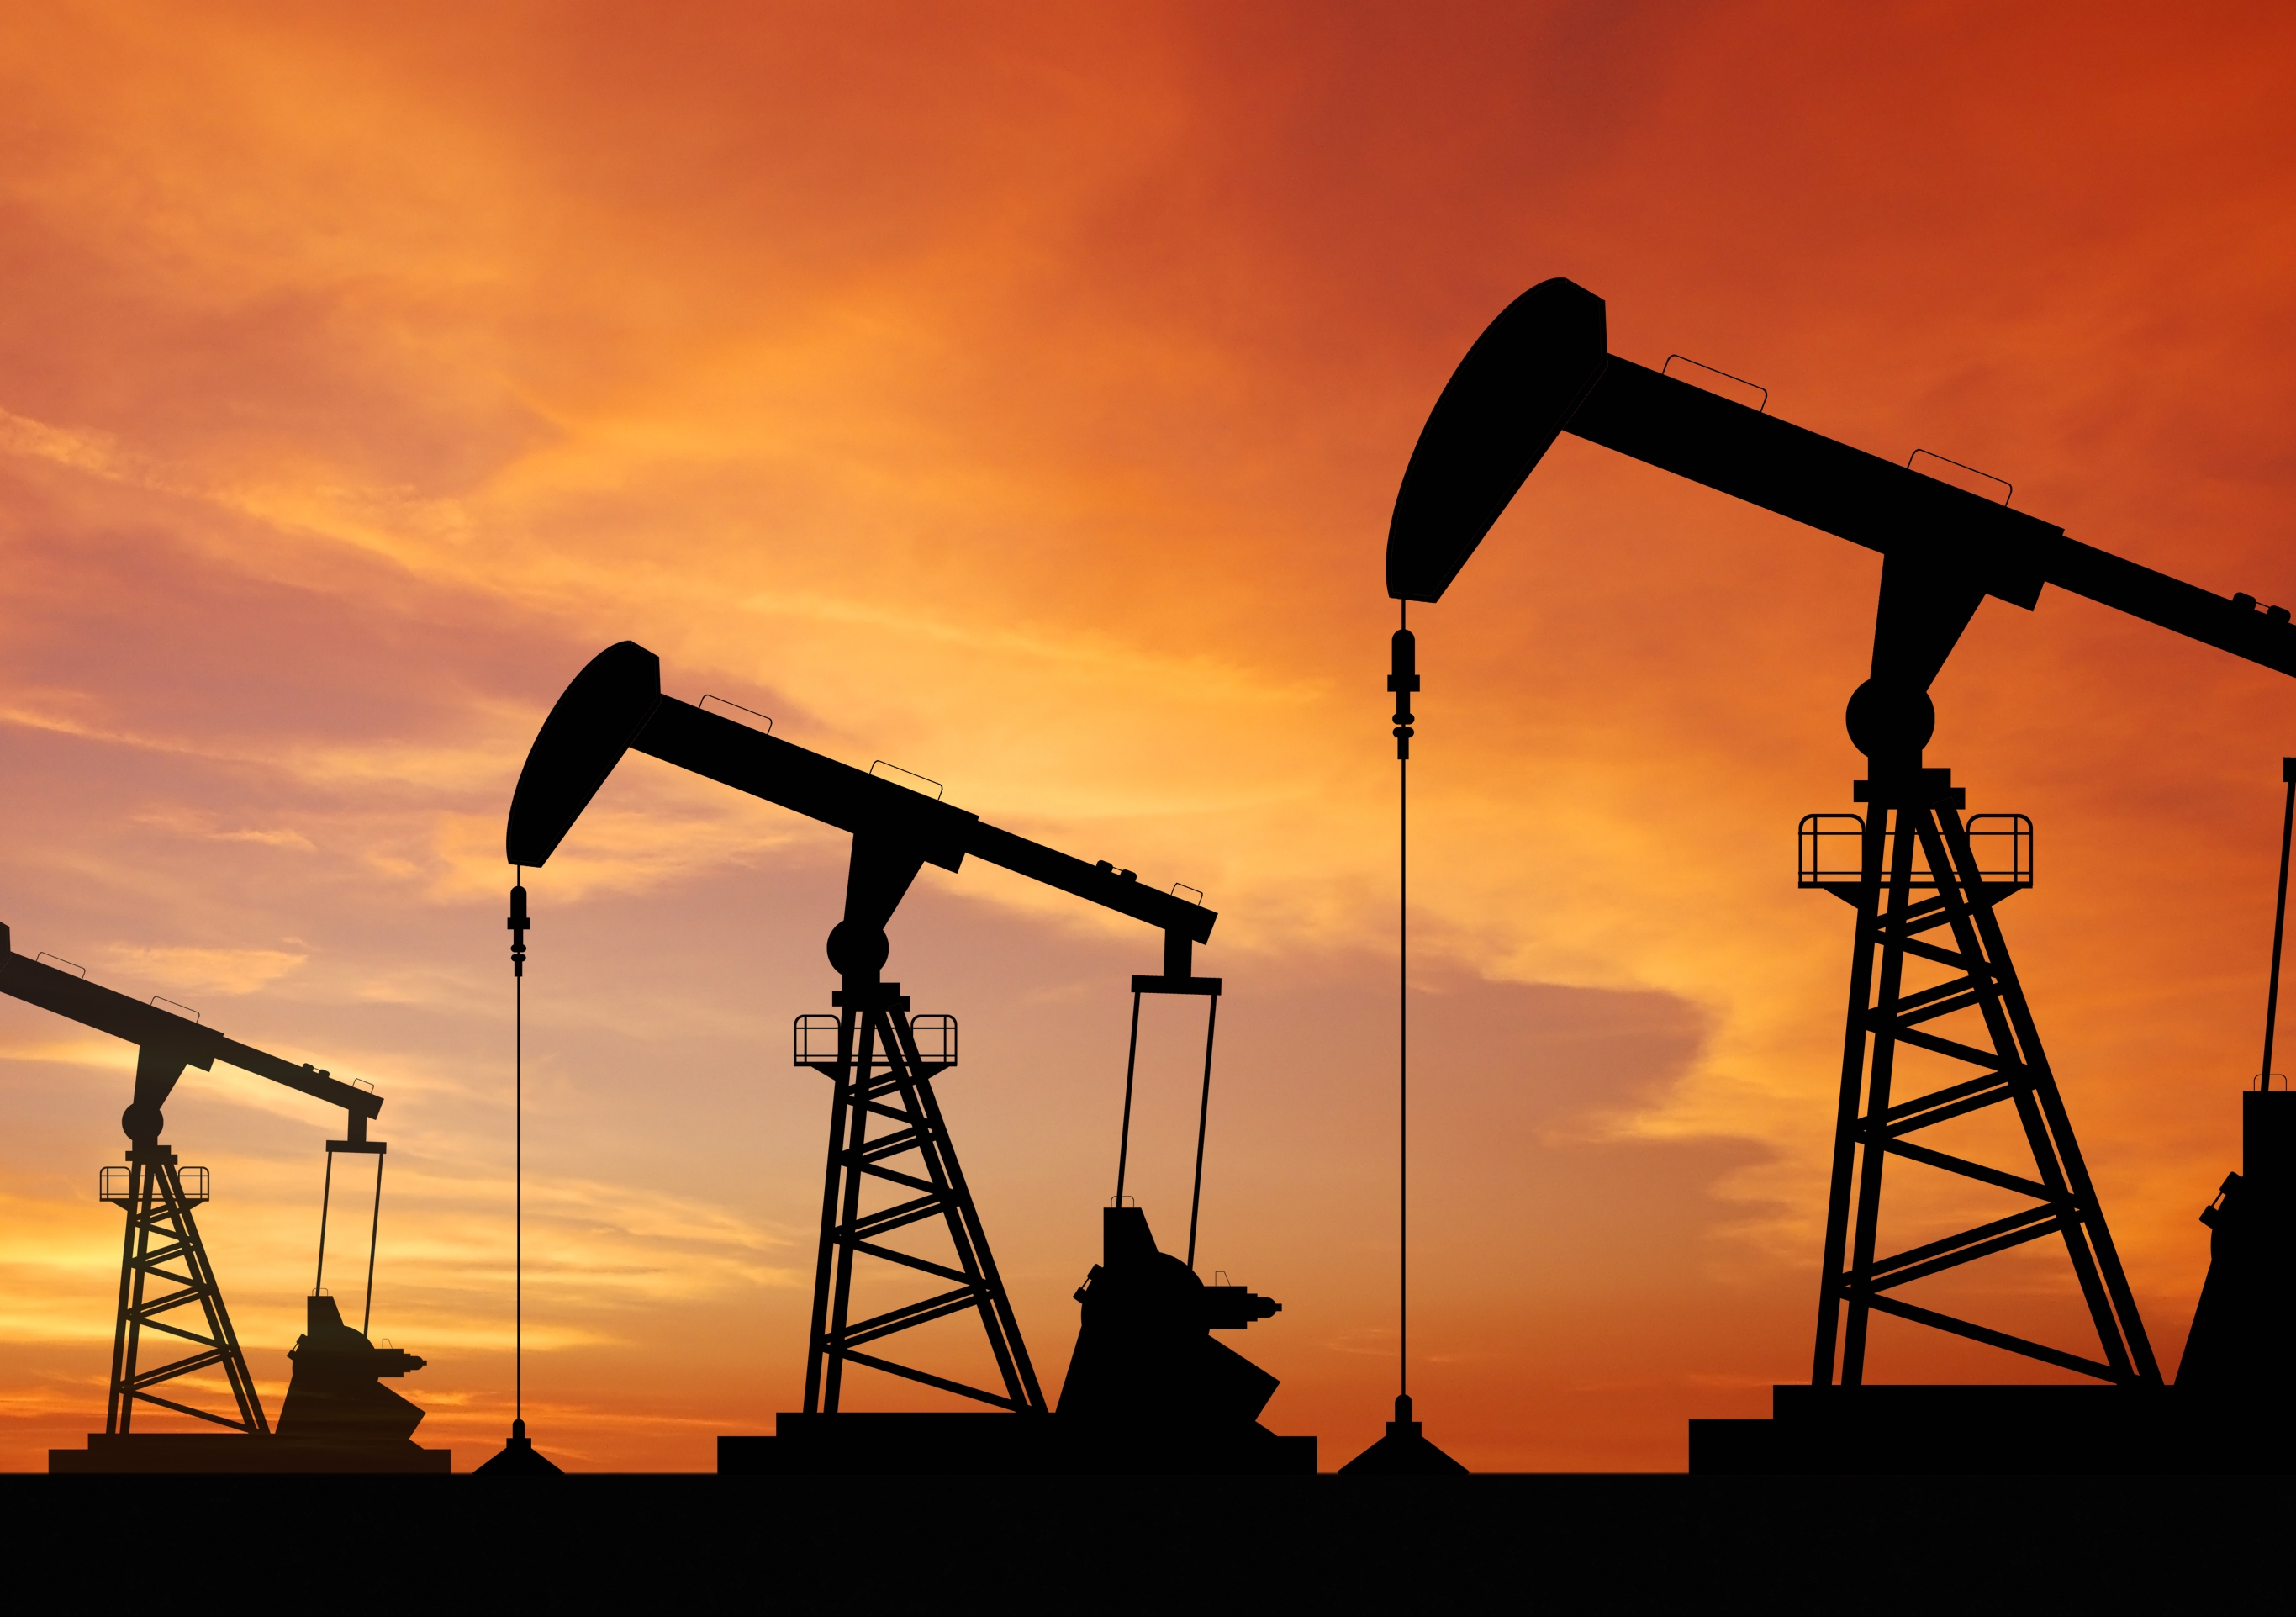 For most industries a drop in oil prices could ease pressure via falling fuel costs.